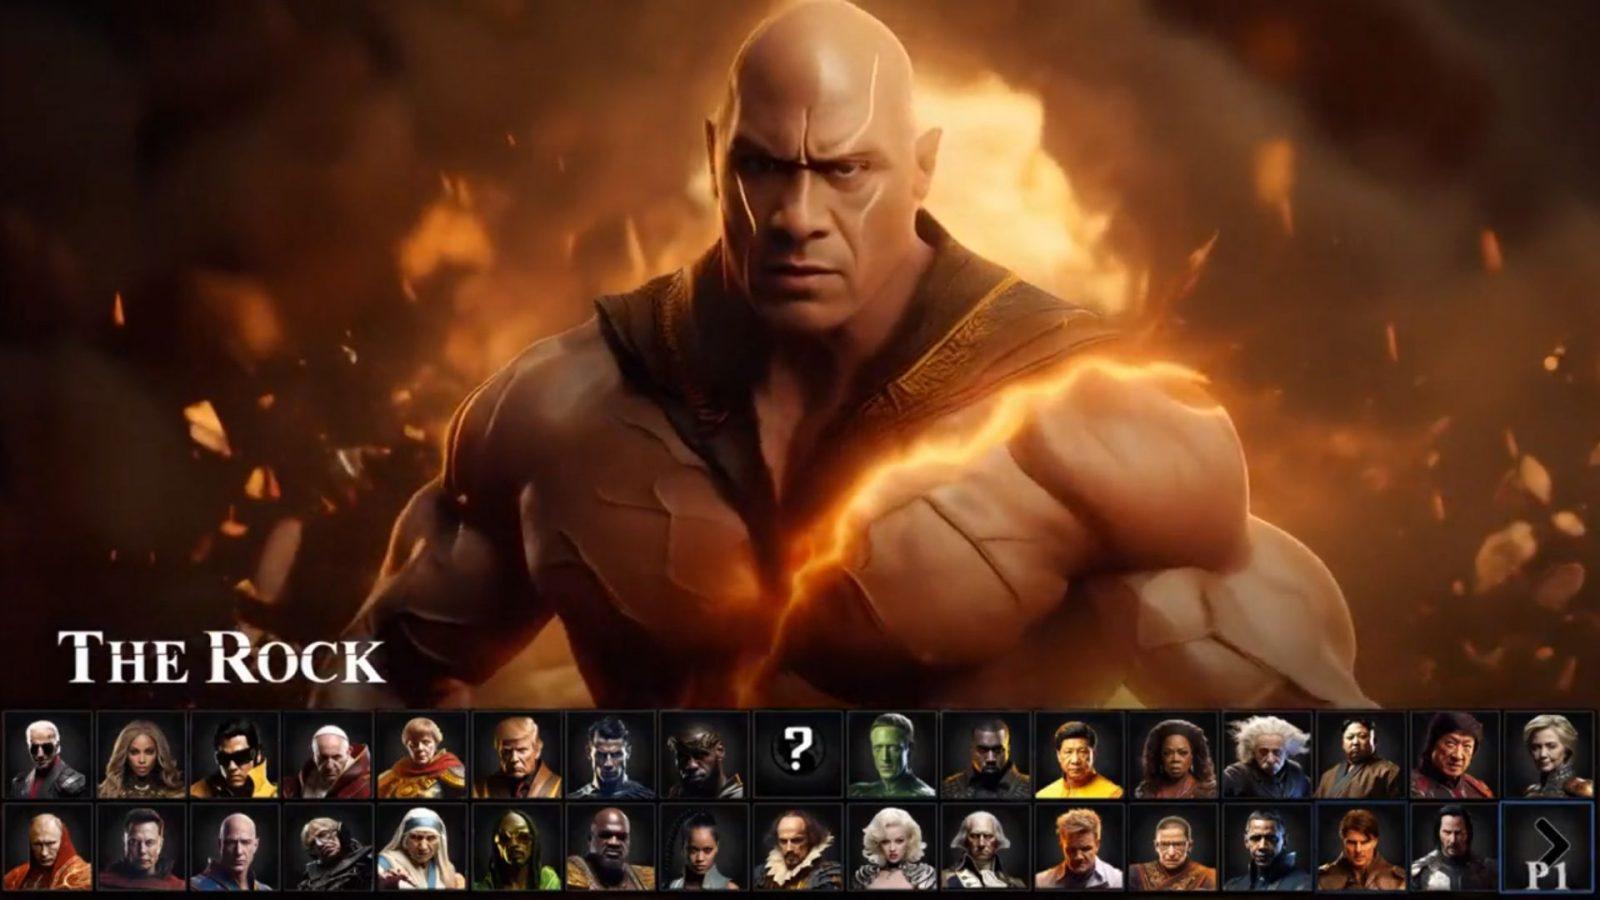 Mortal Kombat 1 director reacts to viral AI DLC with Taylor Swift, The Rock  & more - Dexerto